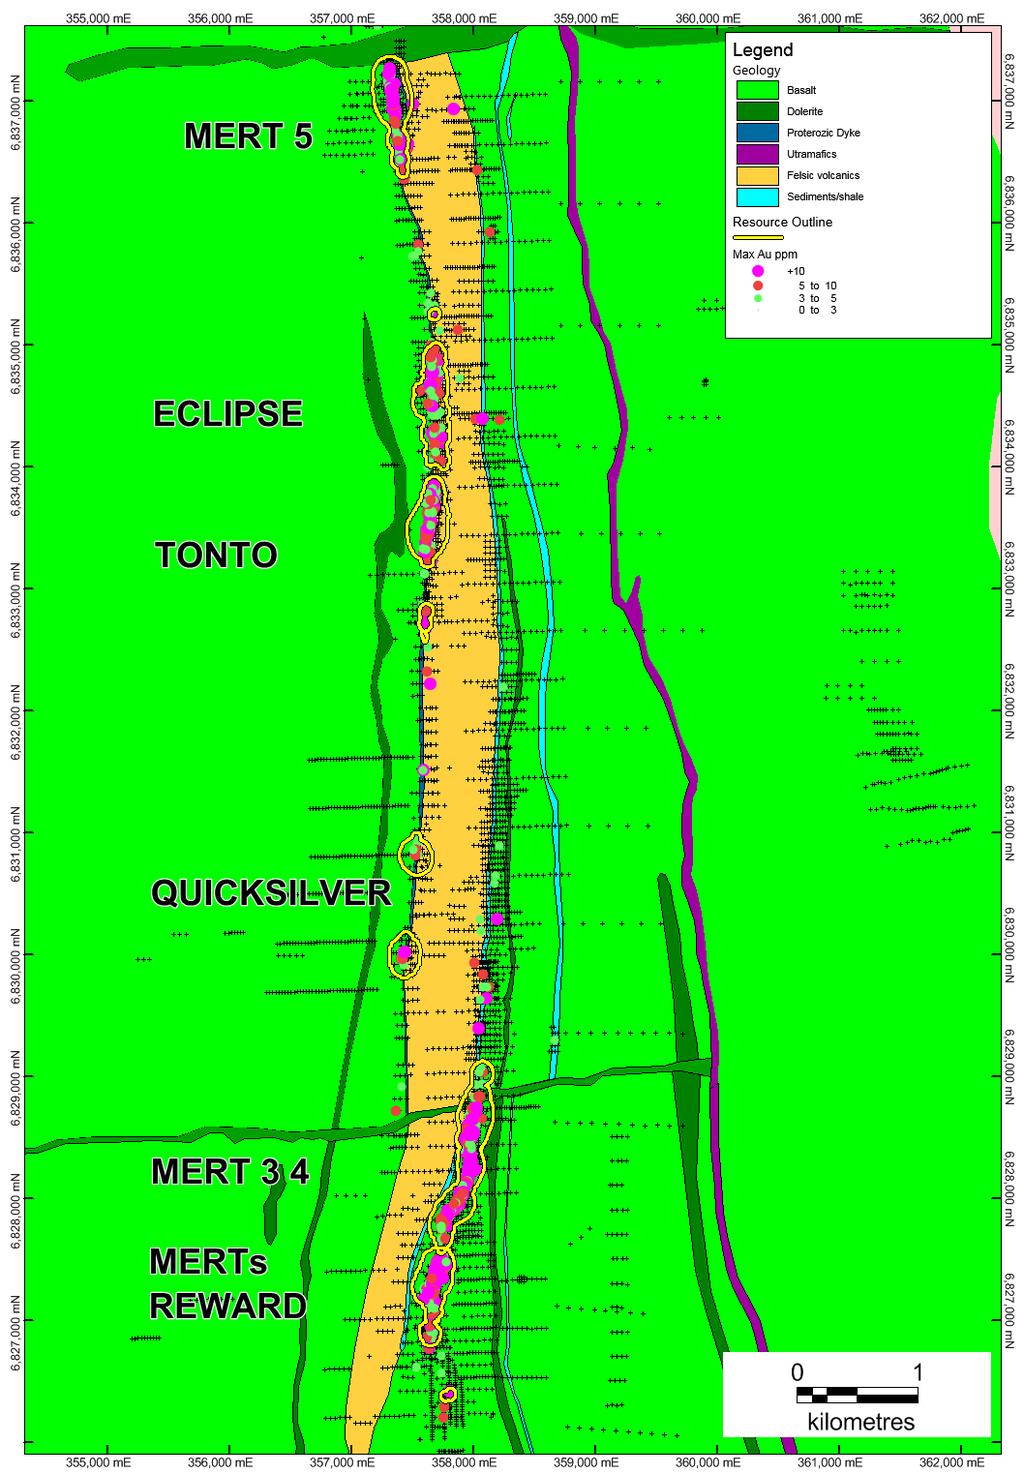 Exploration Target Outline Figure 2 Plan view of the Mertondale Mining Centre highlighting previous drilling with Maximum down hole gold along the east and western margin of the Mertondale Shear Zone